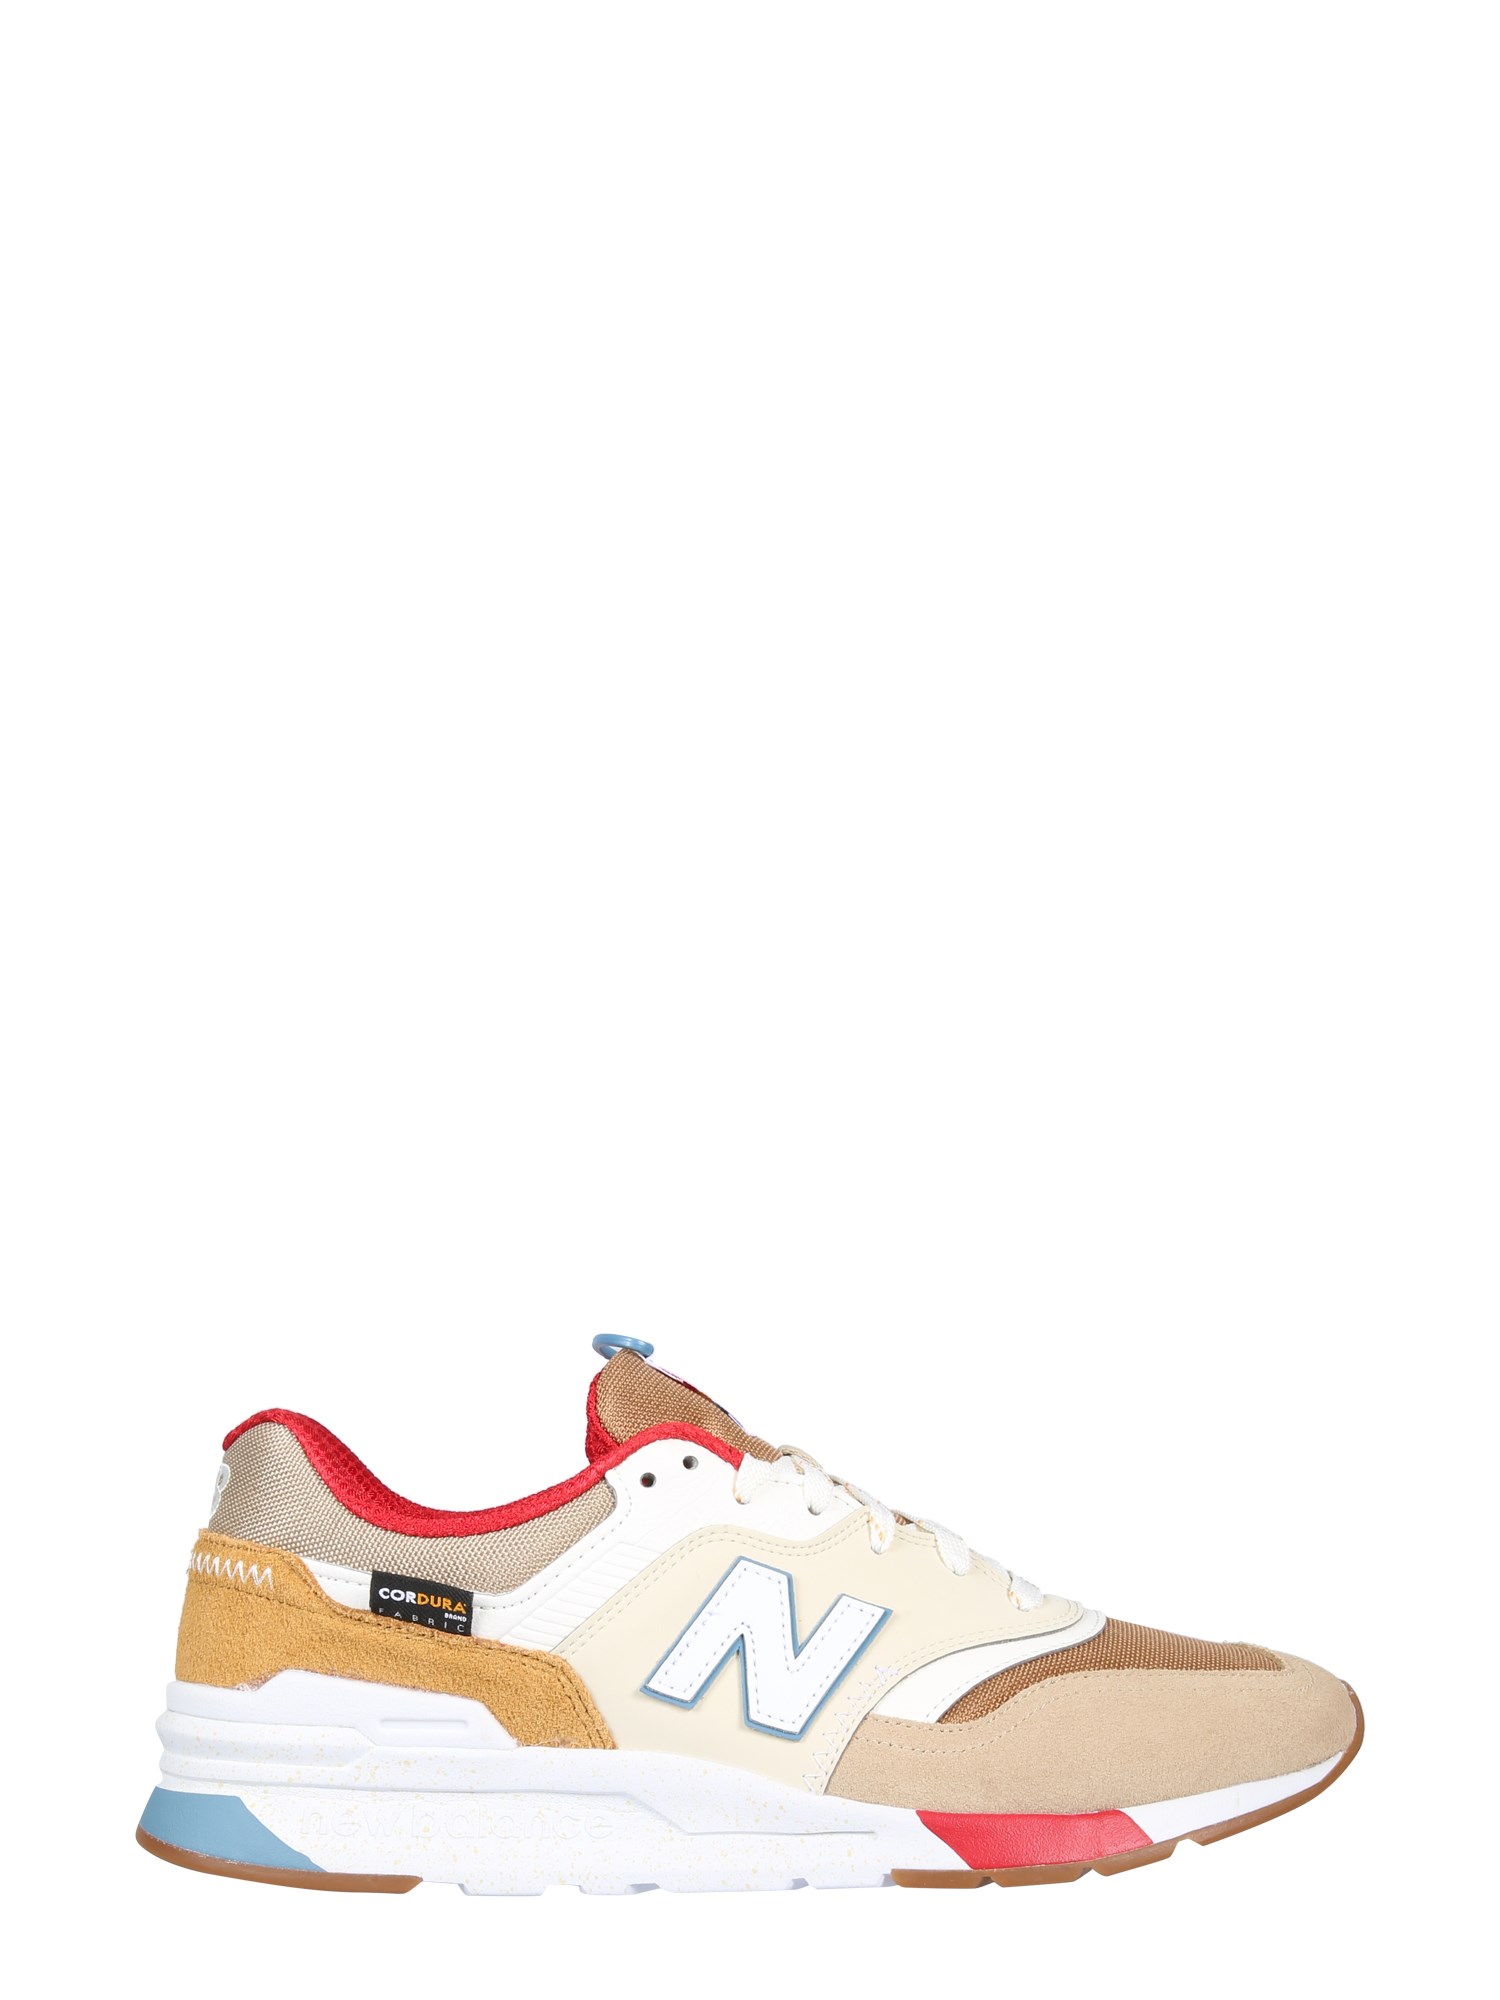 new balance 997h sneakers